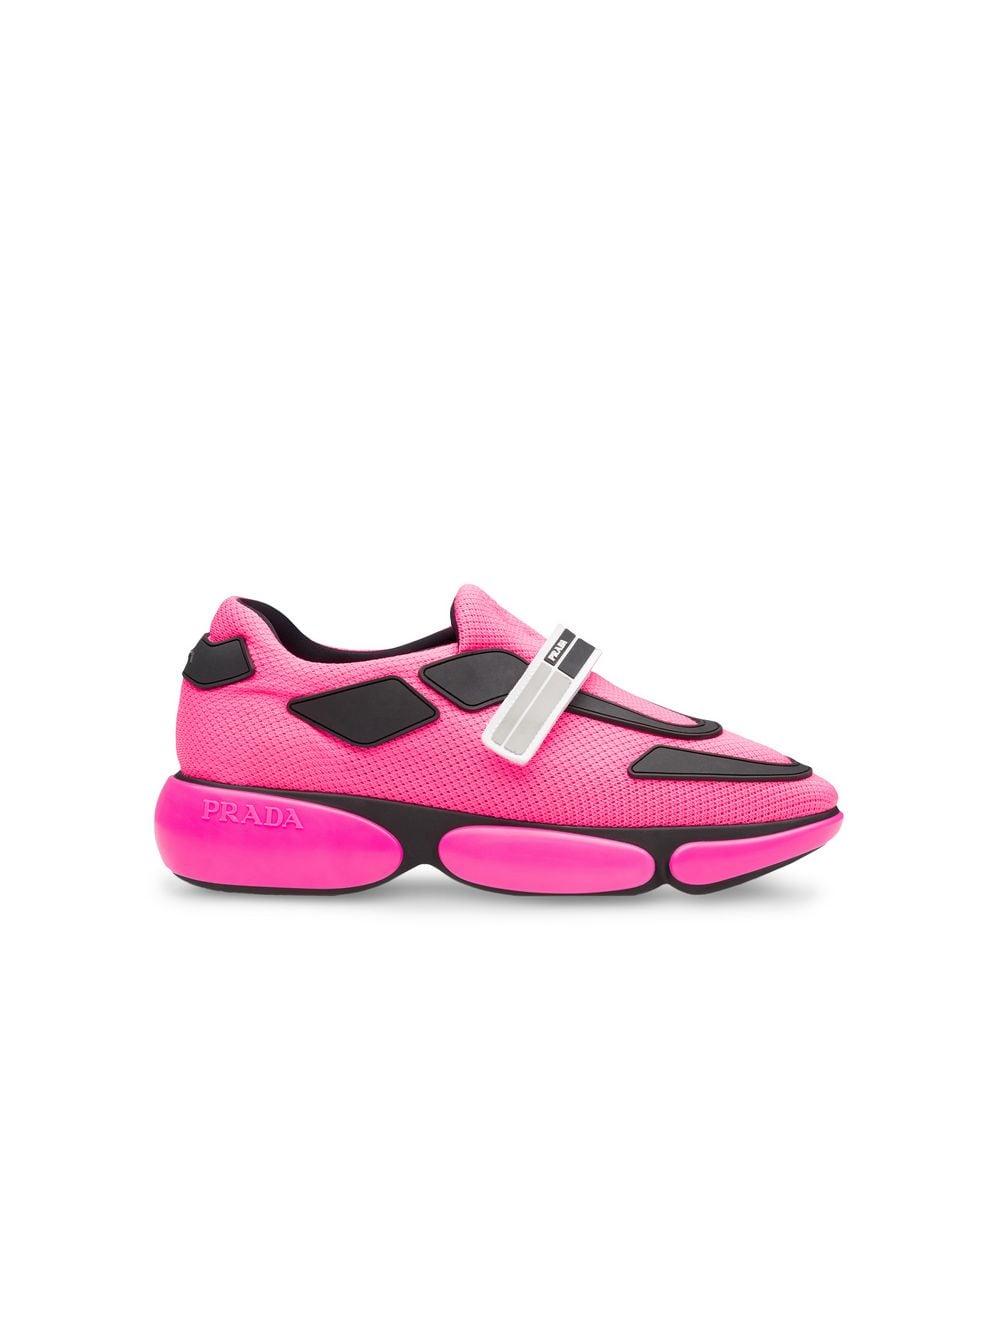 Prada Leather Cloudbust Sneakers in Bright Pink (Pink) | Lyst